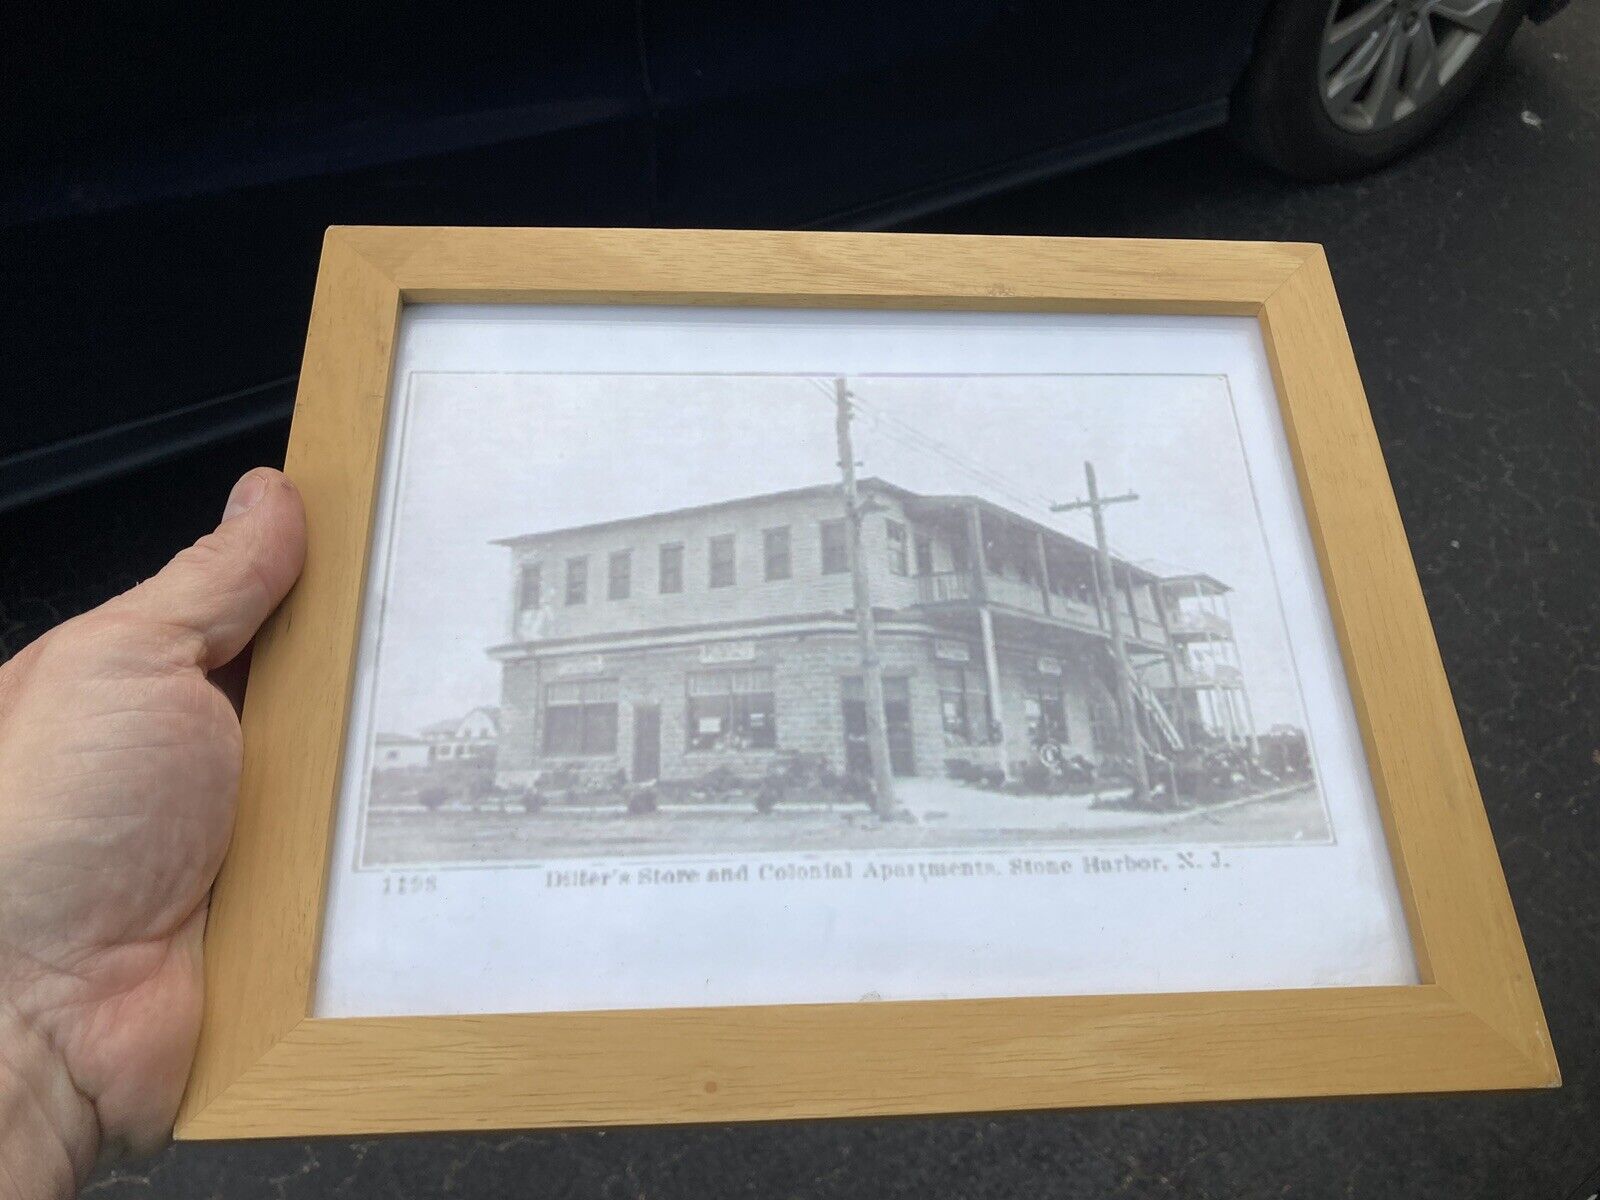 Stone Harbor NJ Old Photo Of Dilter’s Store & Colonial Apts Framed 8x10”